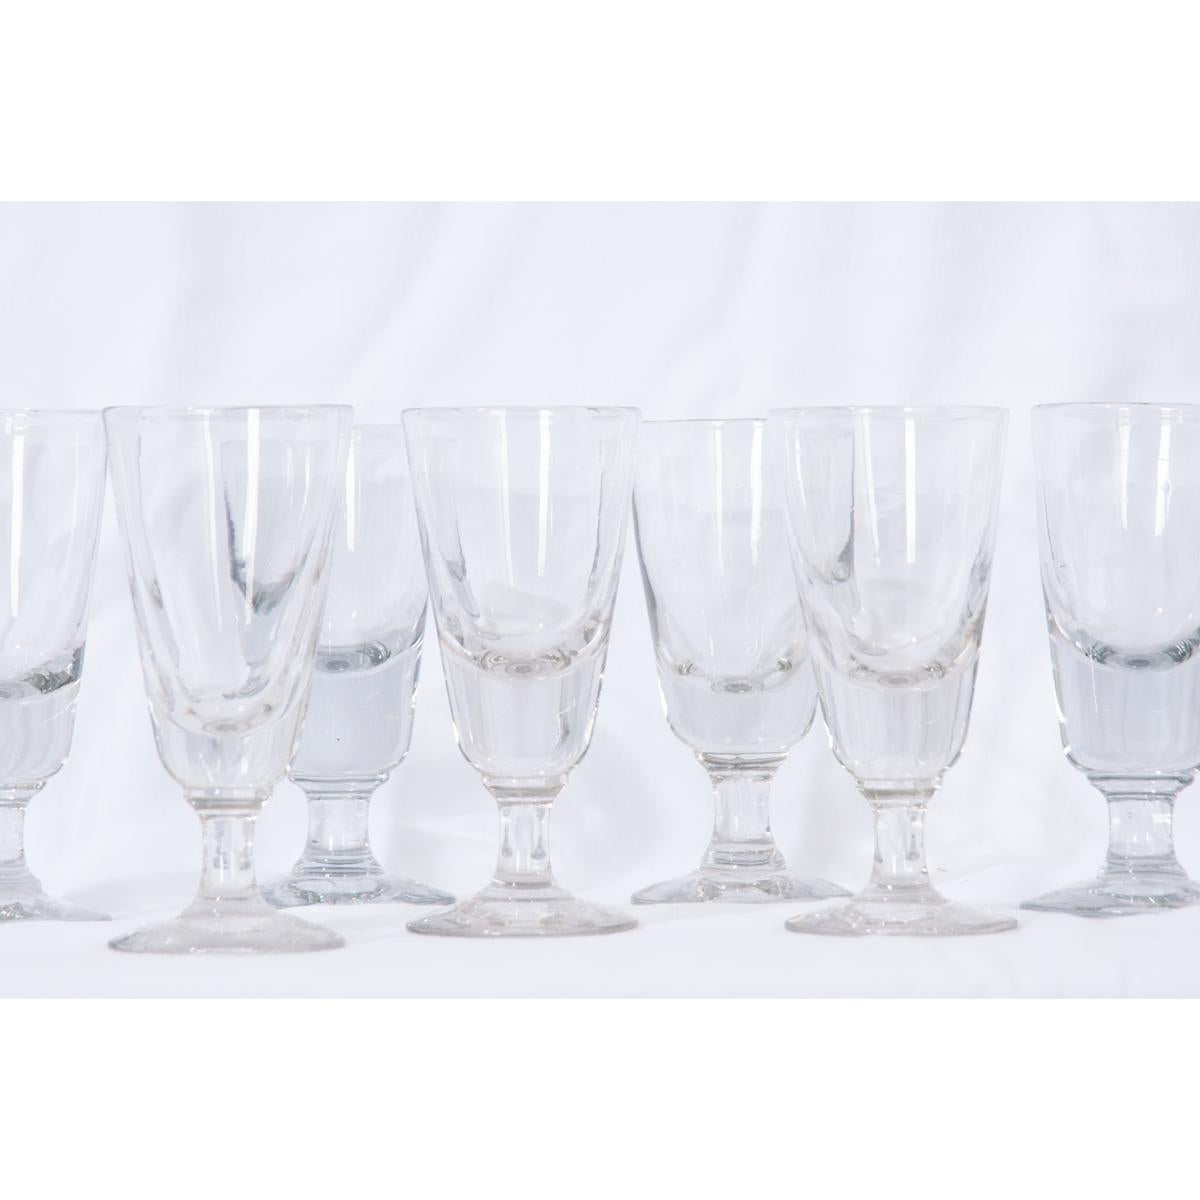 Set French glasses, circa 1880. These heavy, absinthe glasses are each unique hand blown pieces. Sold only as a set of six.